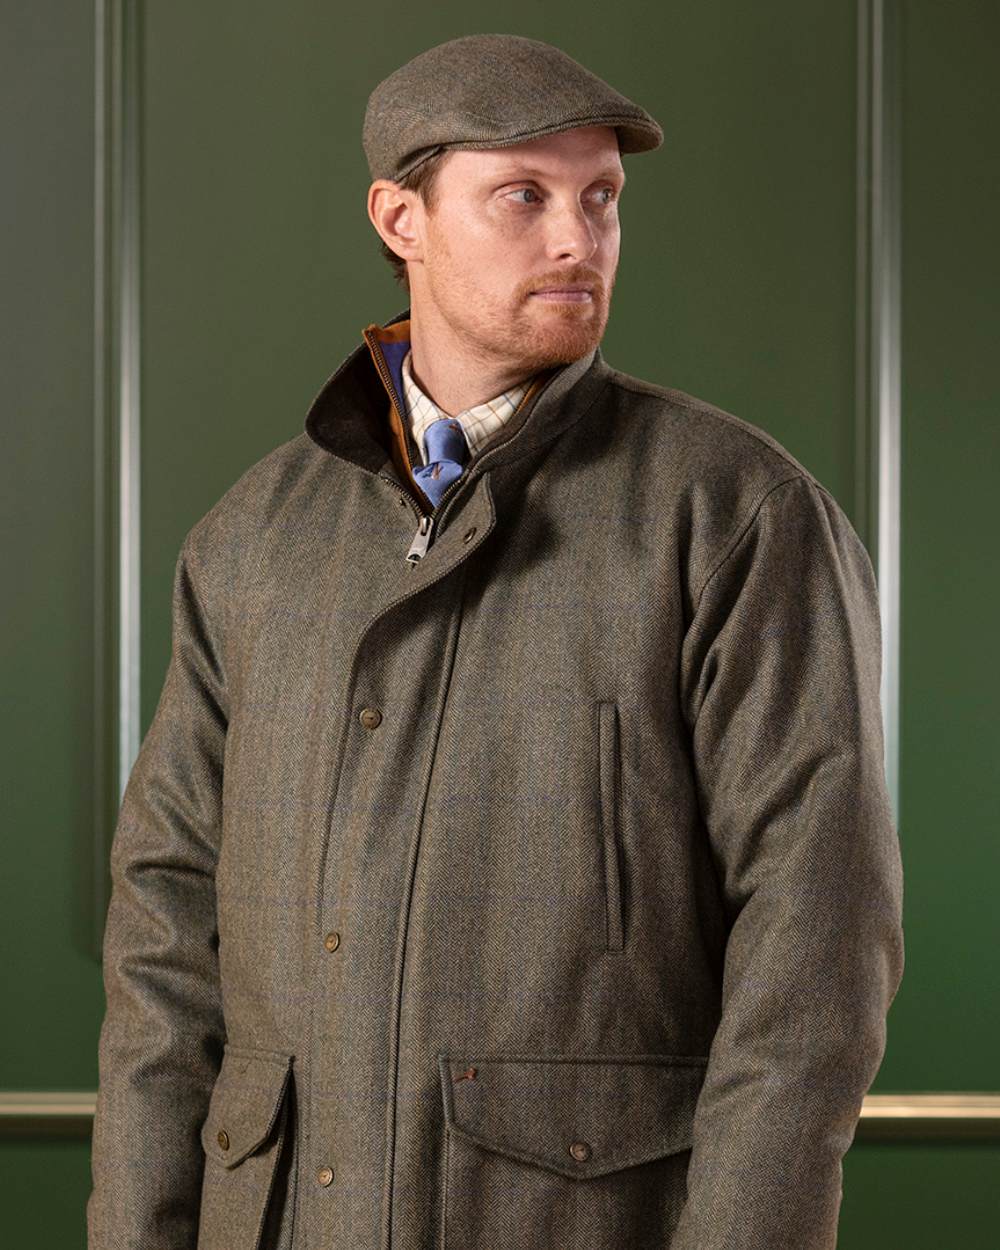 Laksen Laird Flat Cap On A Wall Background